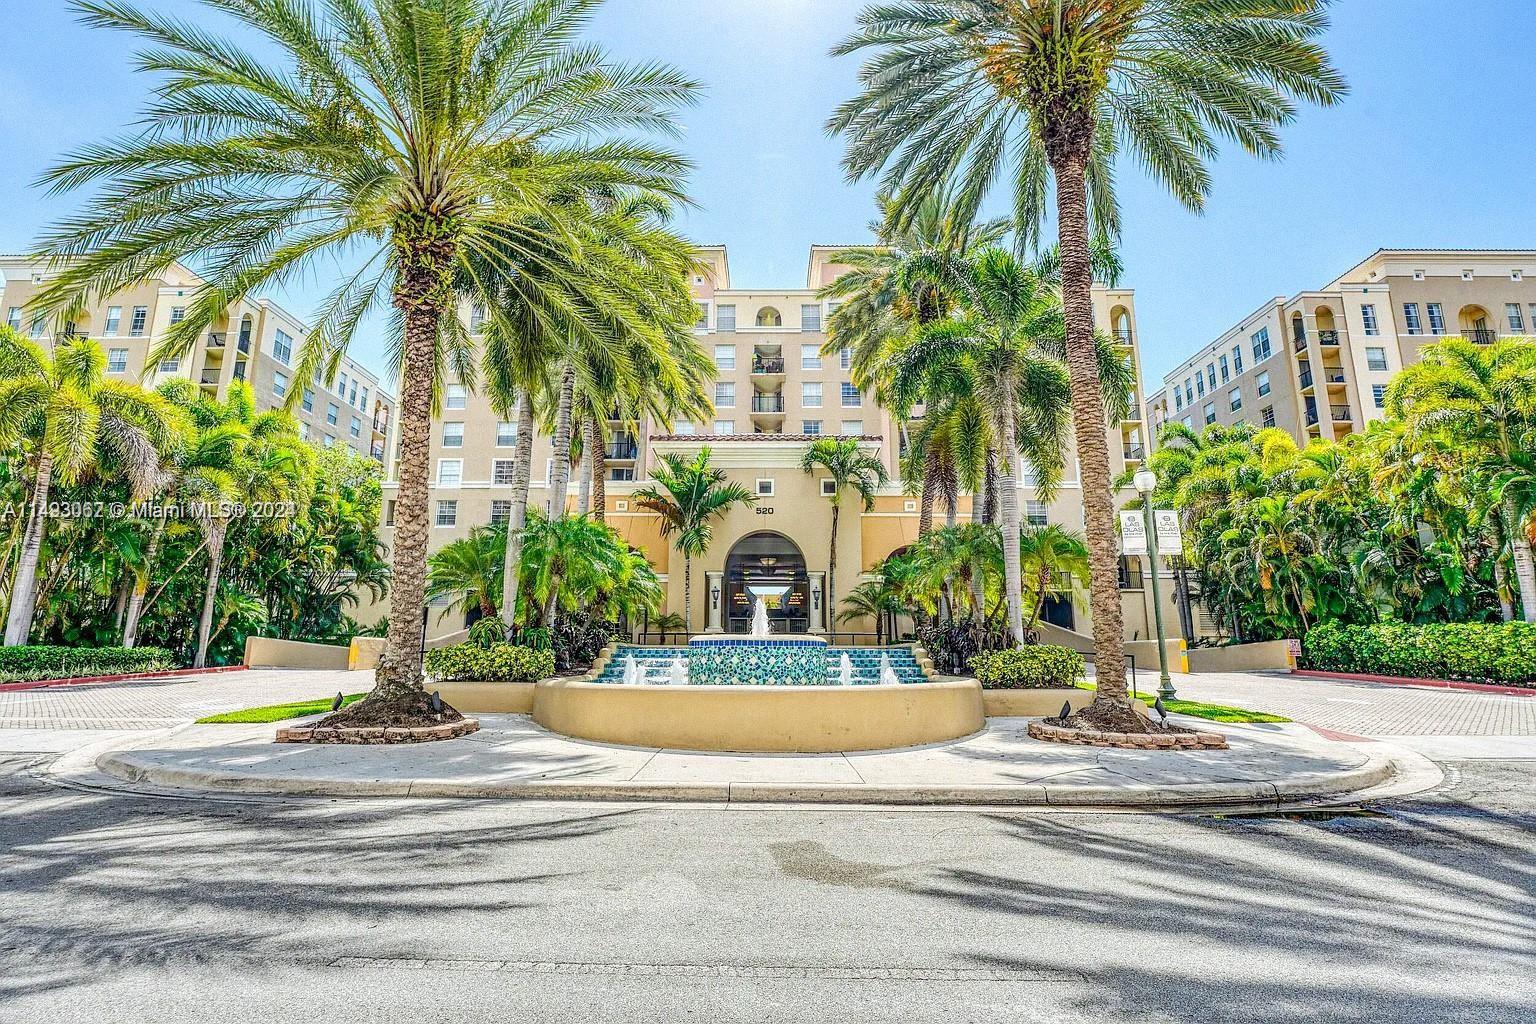 a view of a building with a palm tree